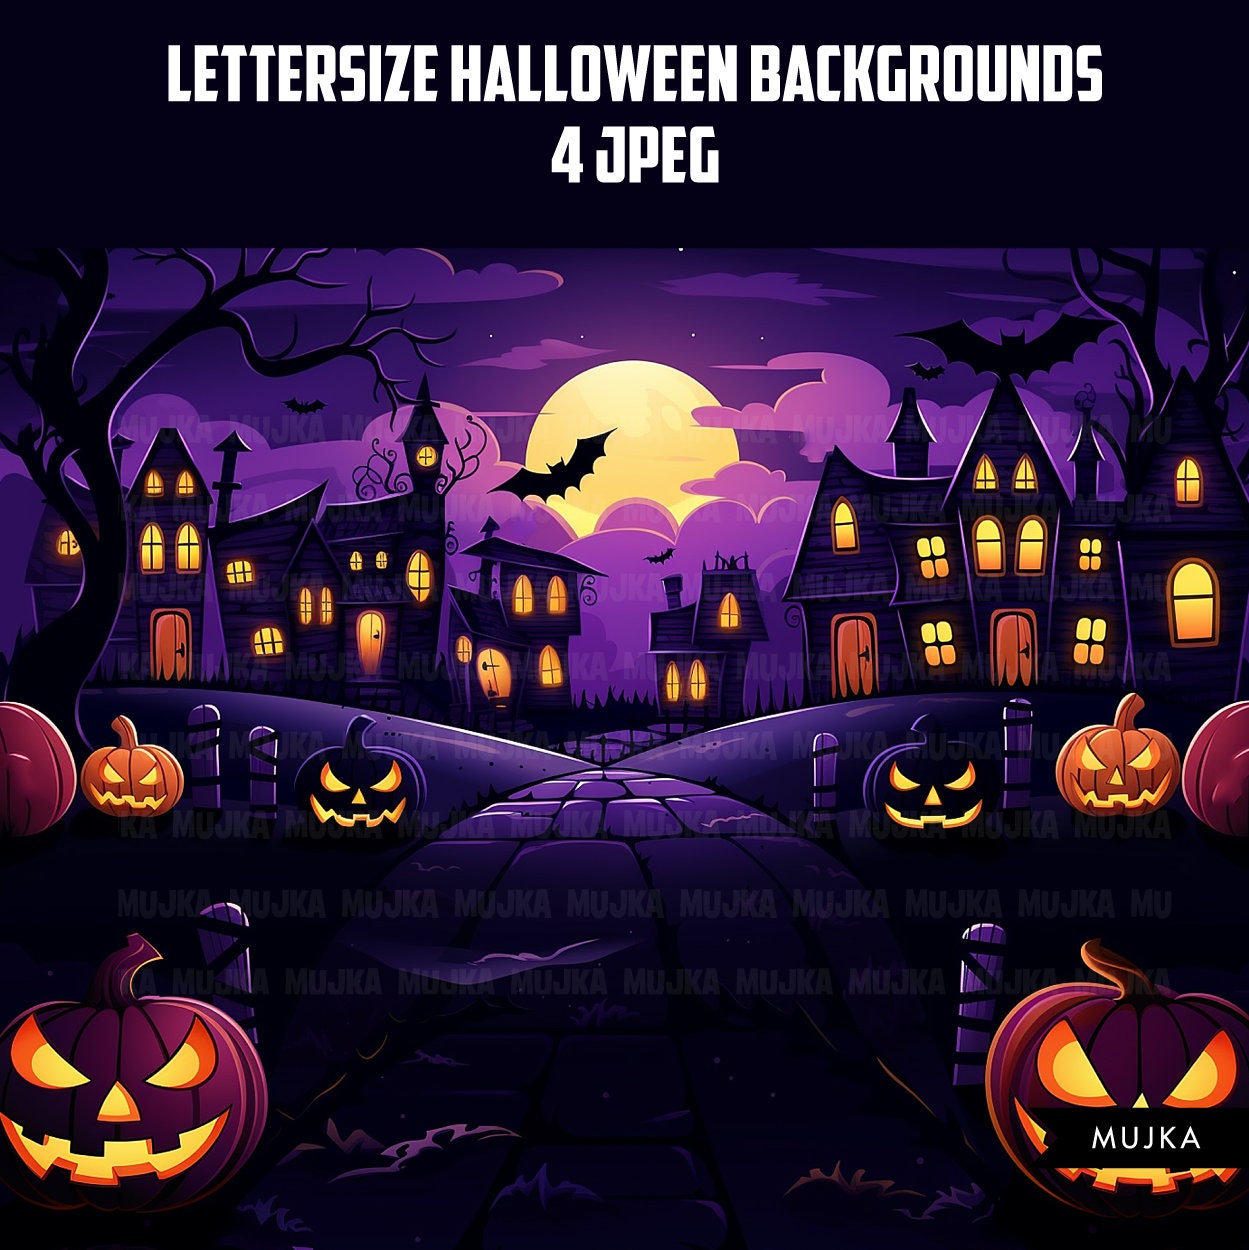 Halloween background, cemetery png, printable digital Halloween posters, haunted house, trick or treat, jacko lantern png, halloween decor